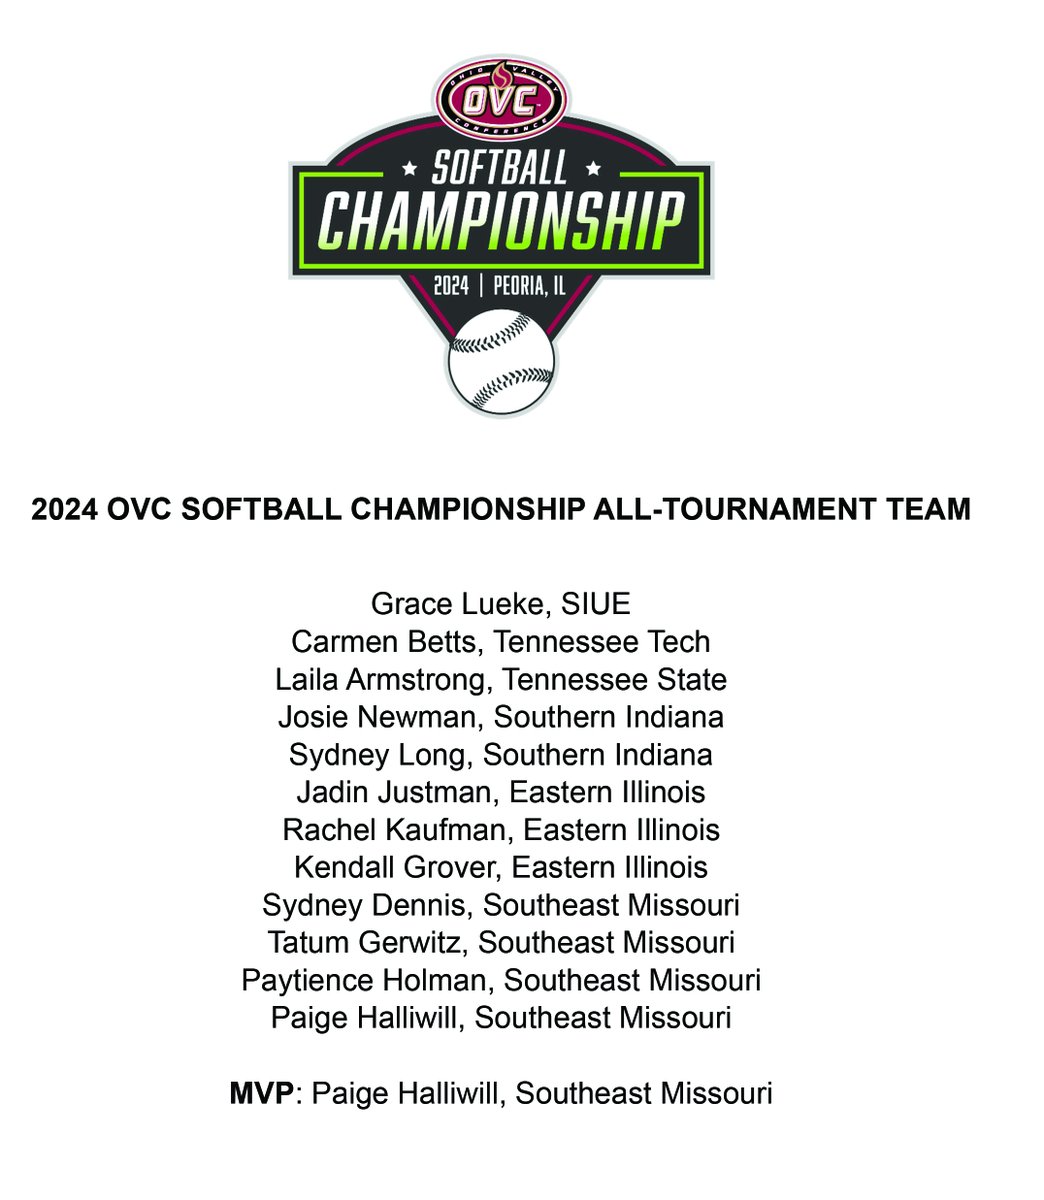 Here is a look at the 2024 OVC Softball 🥎 Championship 𝗔𝗟𝗟-𝗧𝗢𝗨𝗥𝗡𝗔𝗠𝗘𝗡𝗧 Team. #OVCit